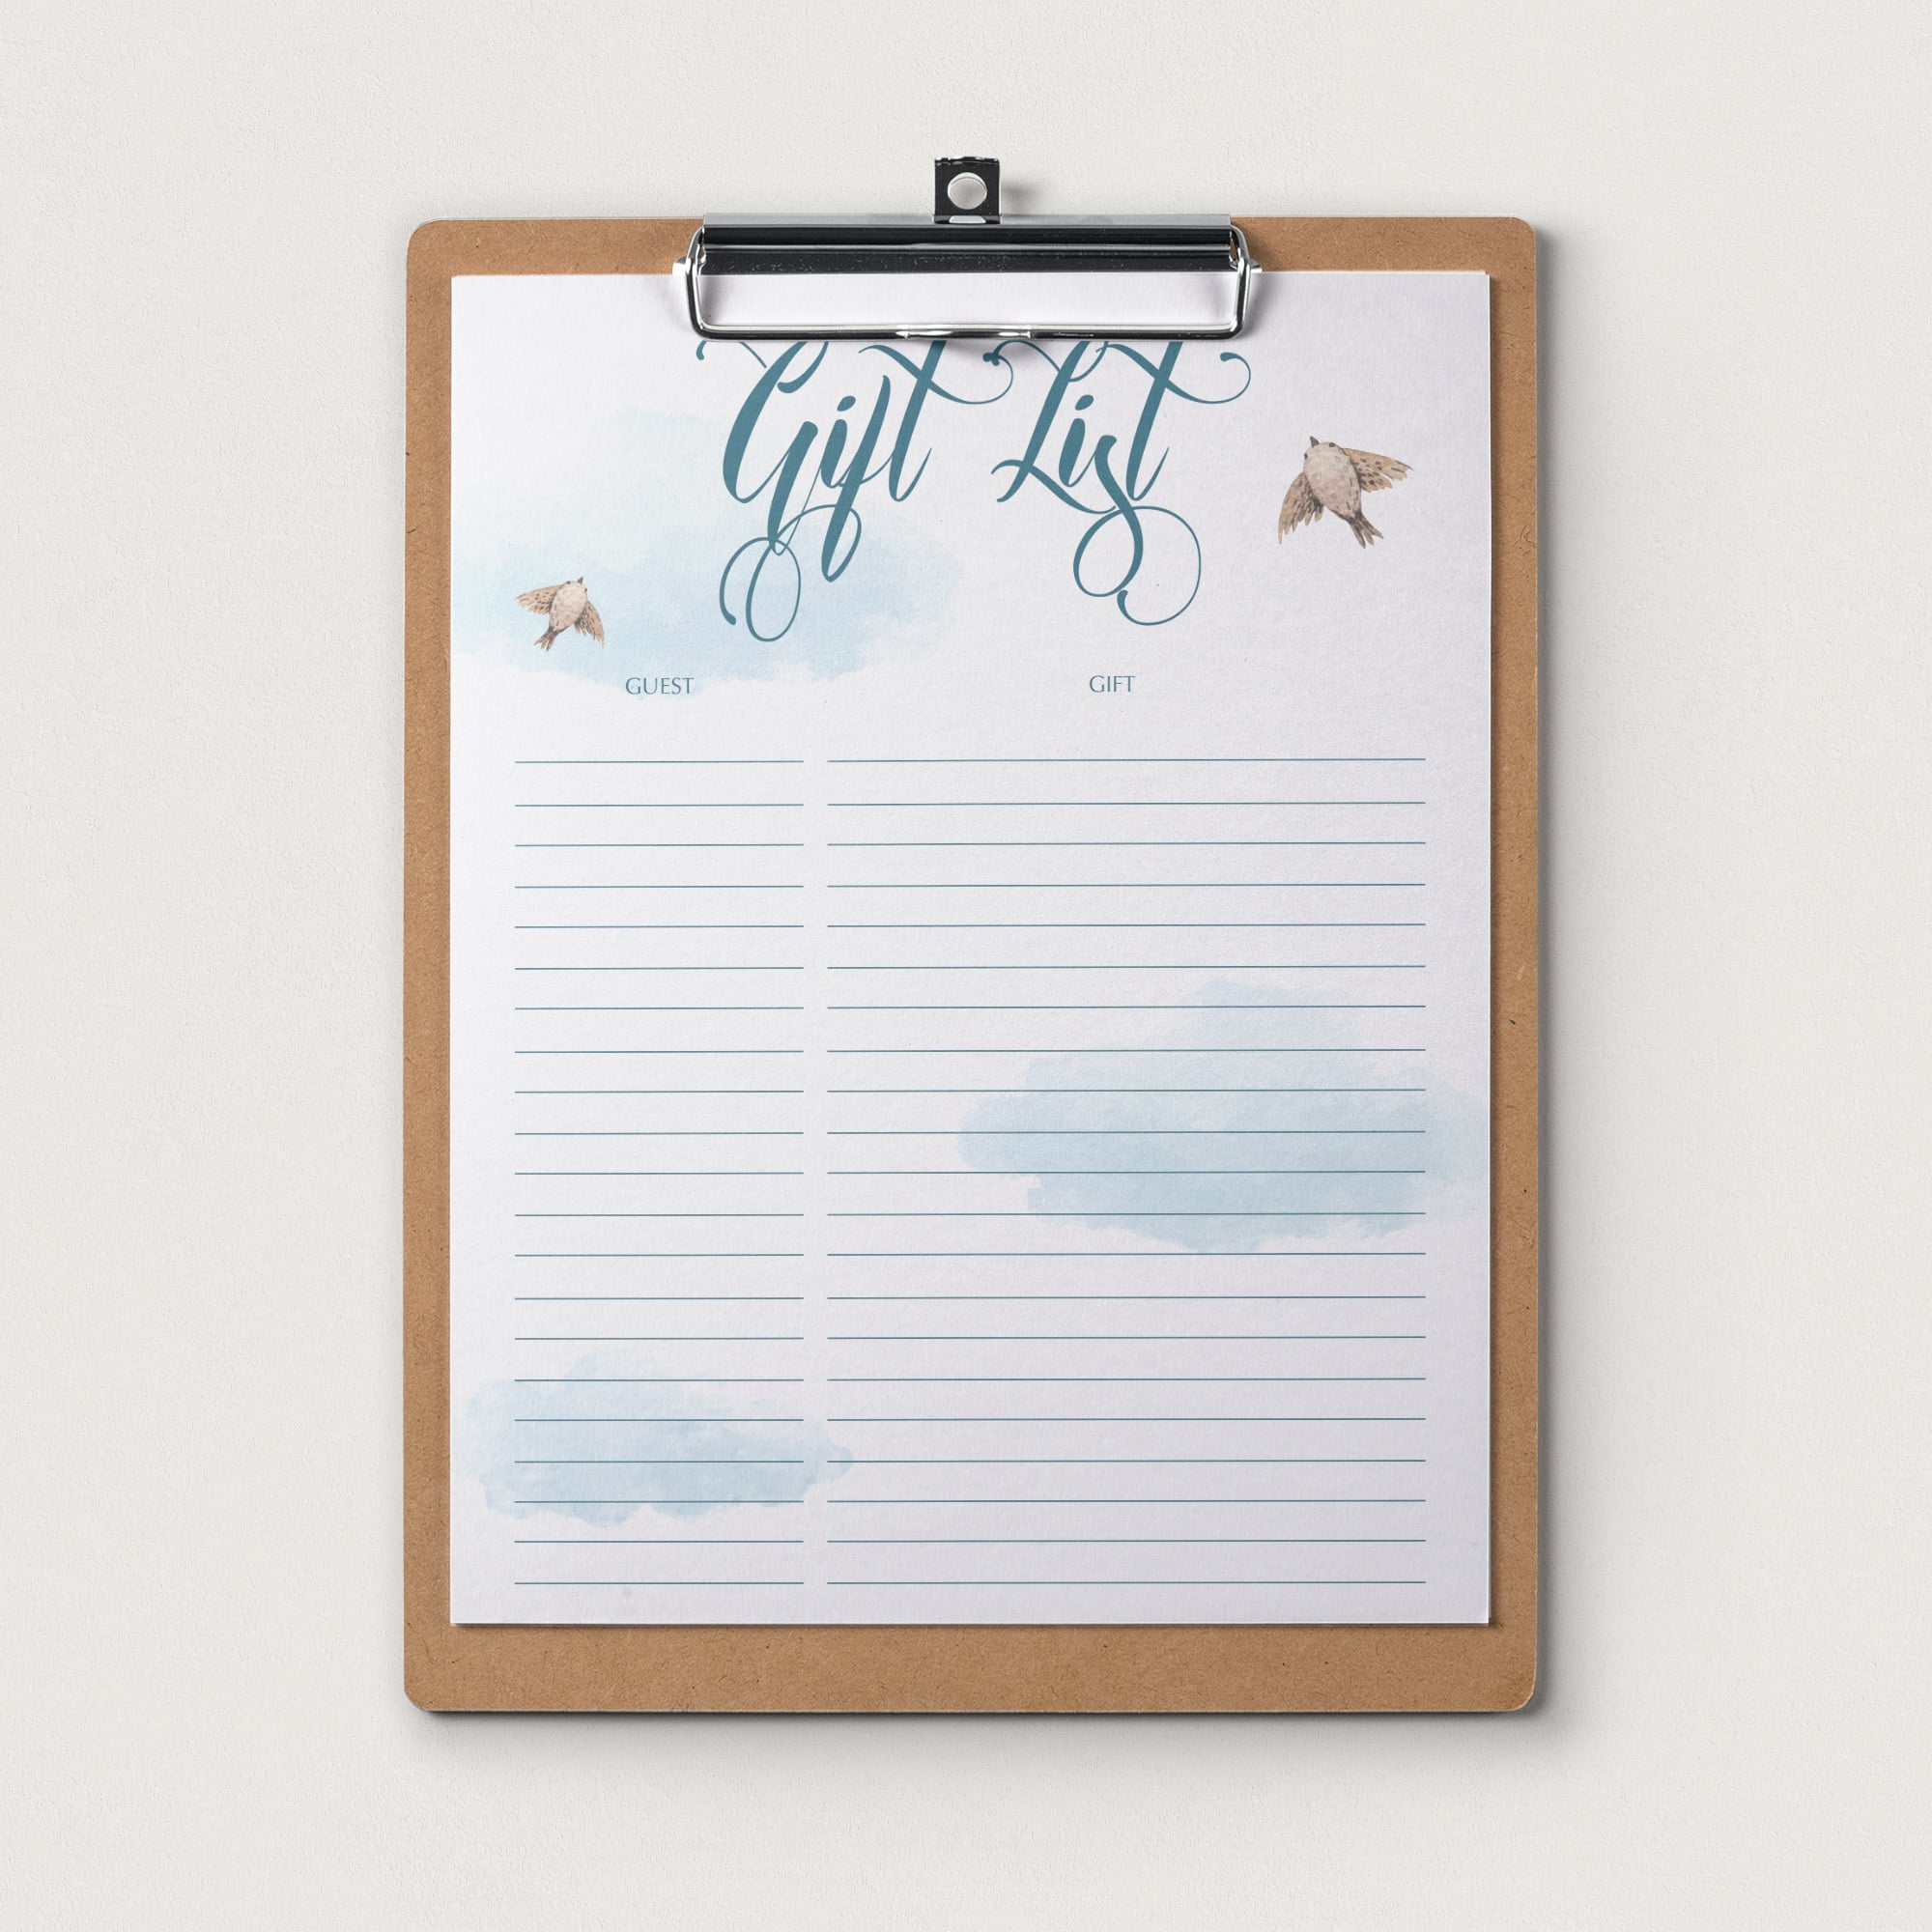 Printable gift tracker with blue watercolor clouds by LittleSizzle